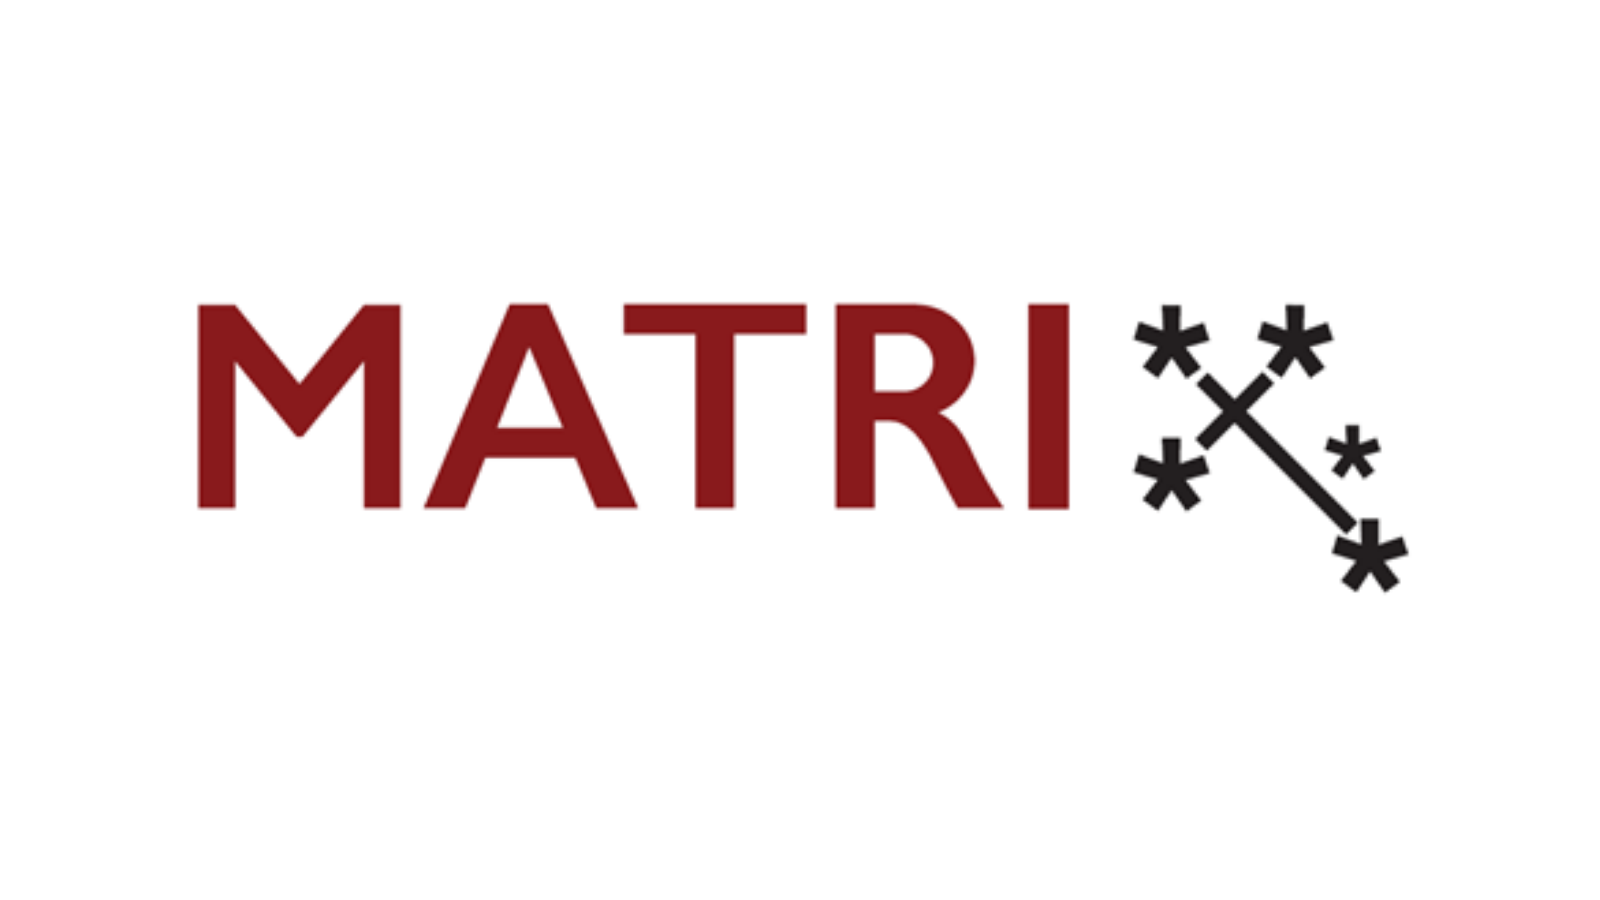 MATRIX is a residential research institute for the mathematical sciences in Australia